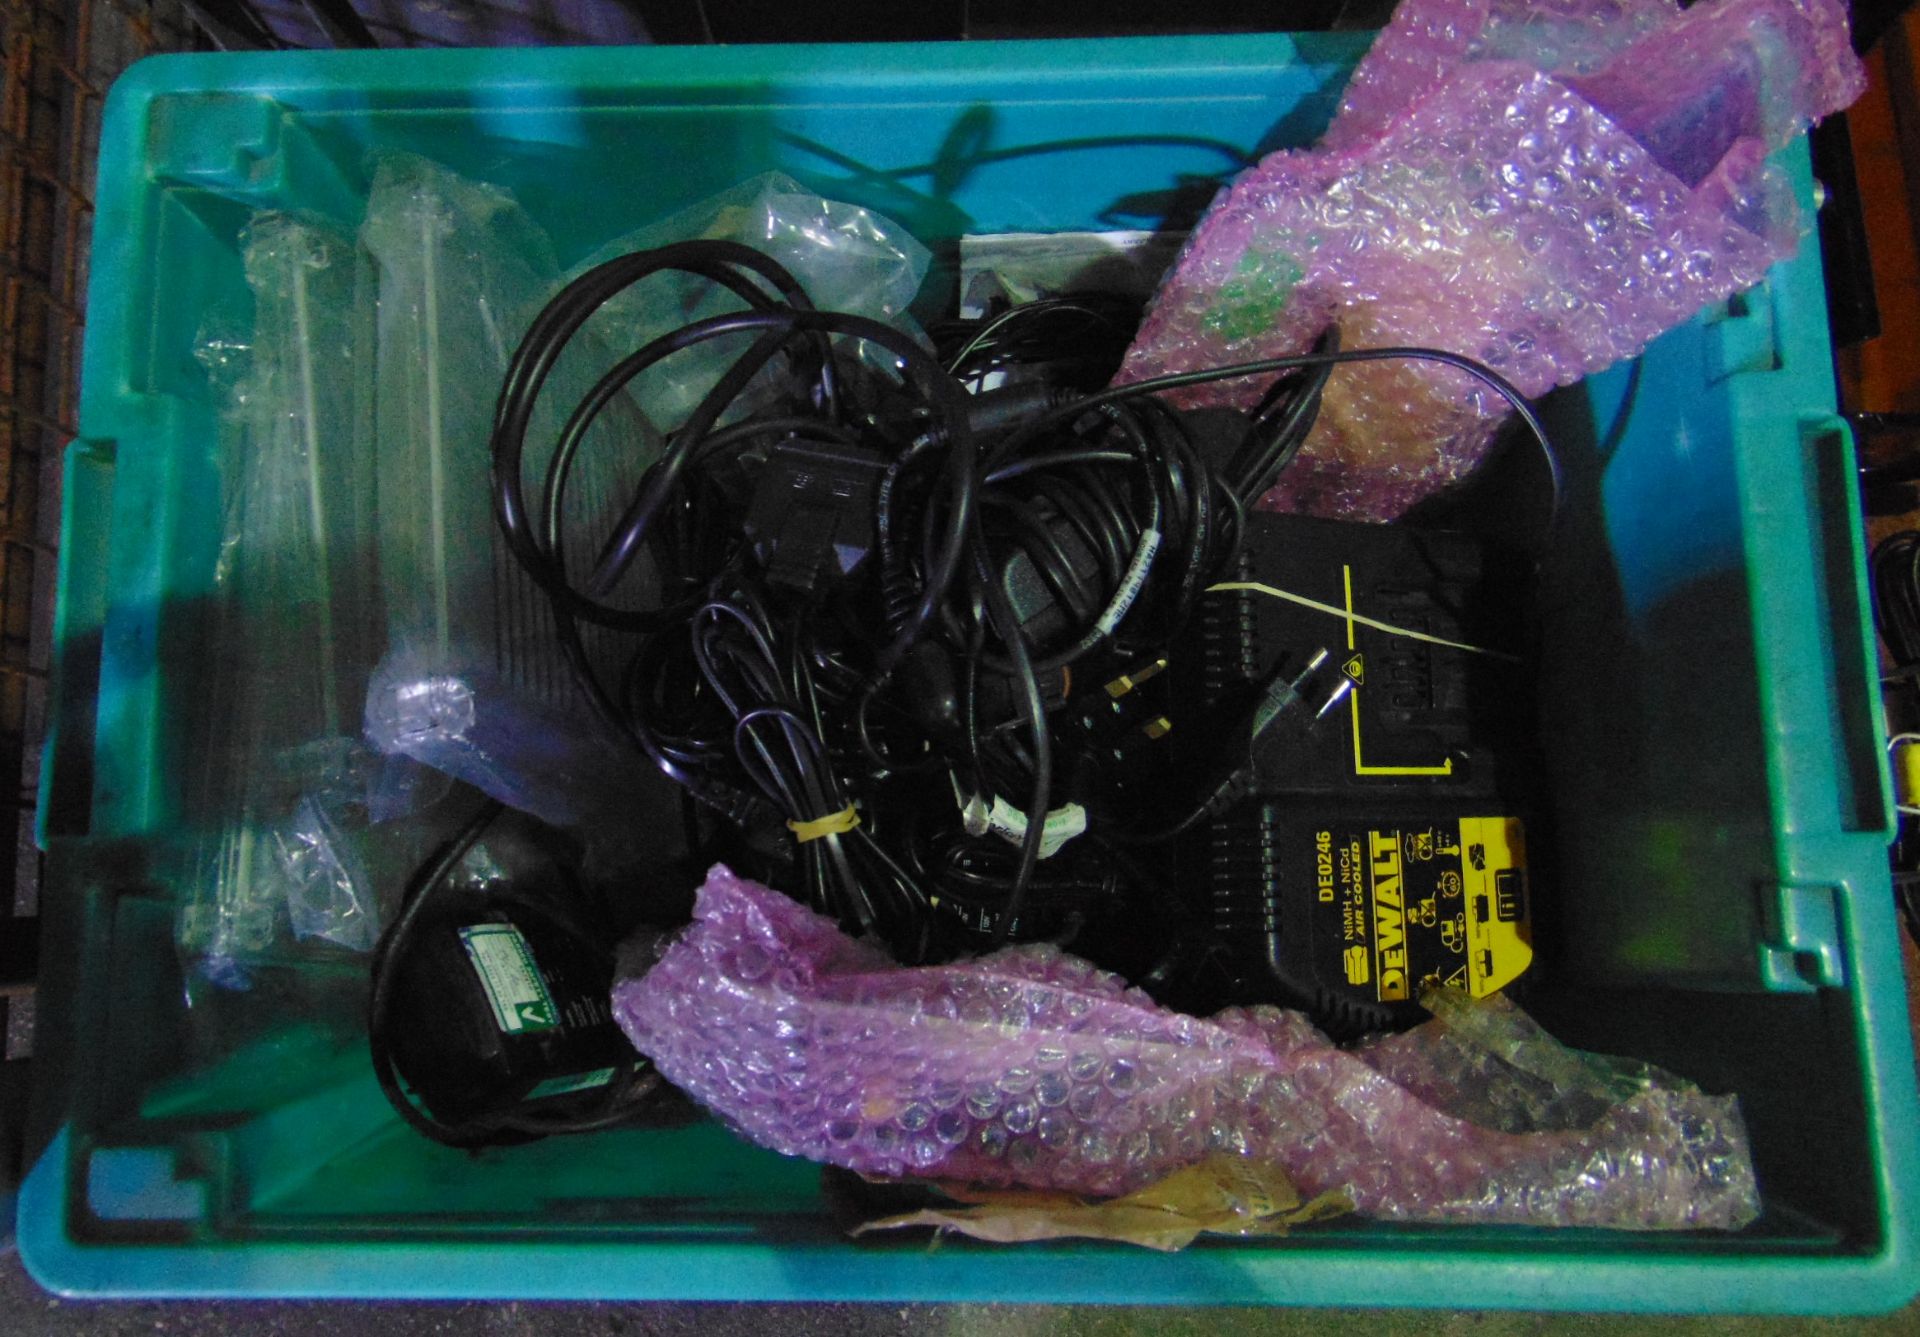 Assortment of Lighting Accessories inc Battery Chargers, Power Cables, ect. - Image 2 of 8